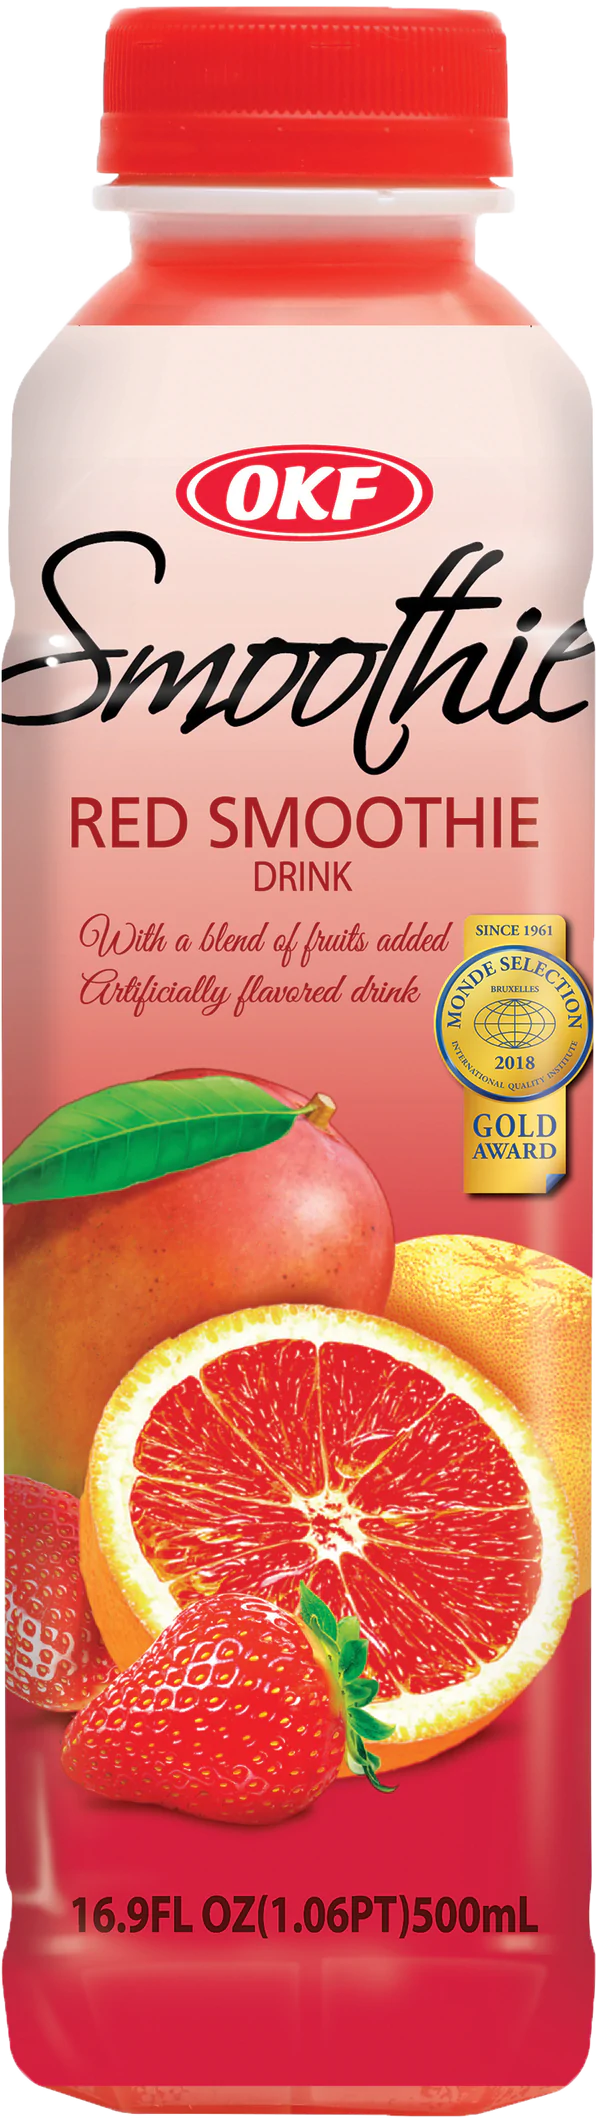 OKF Red Smoothie Drink 500 ml Snaxies Exotic Drinks Montreal Canada